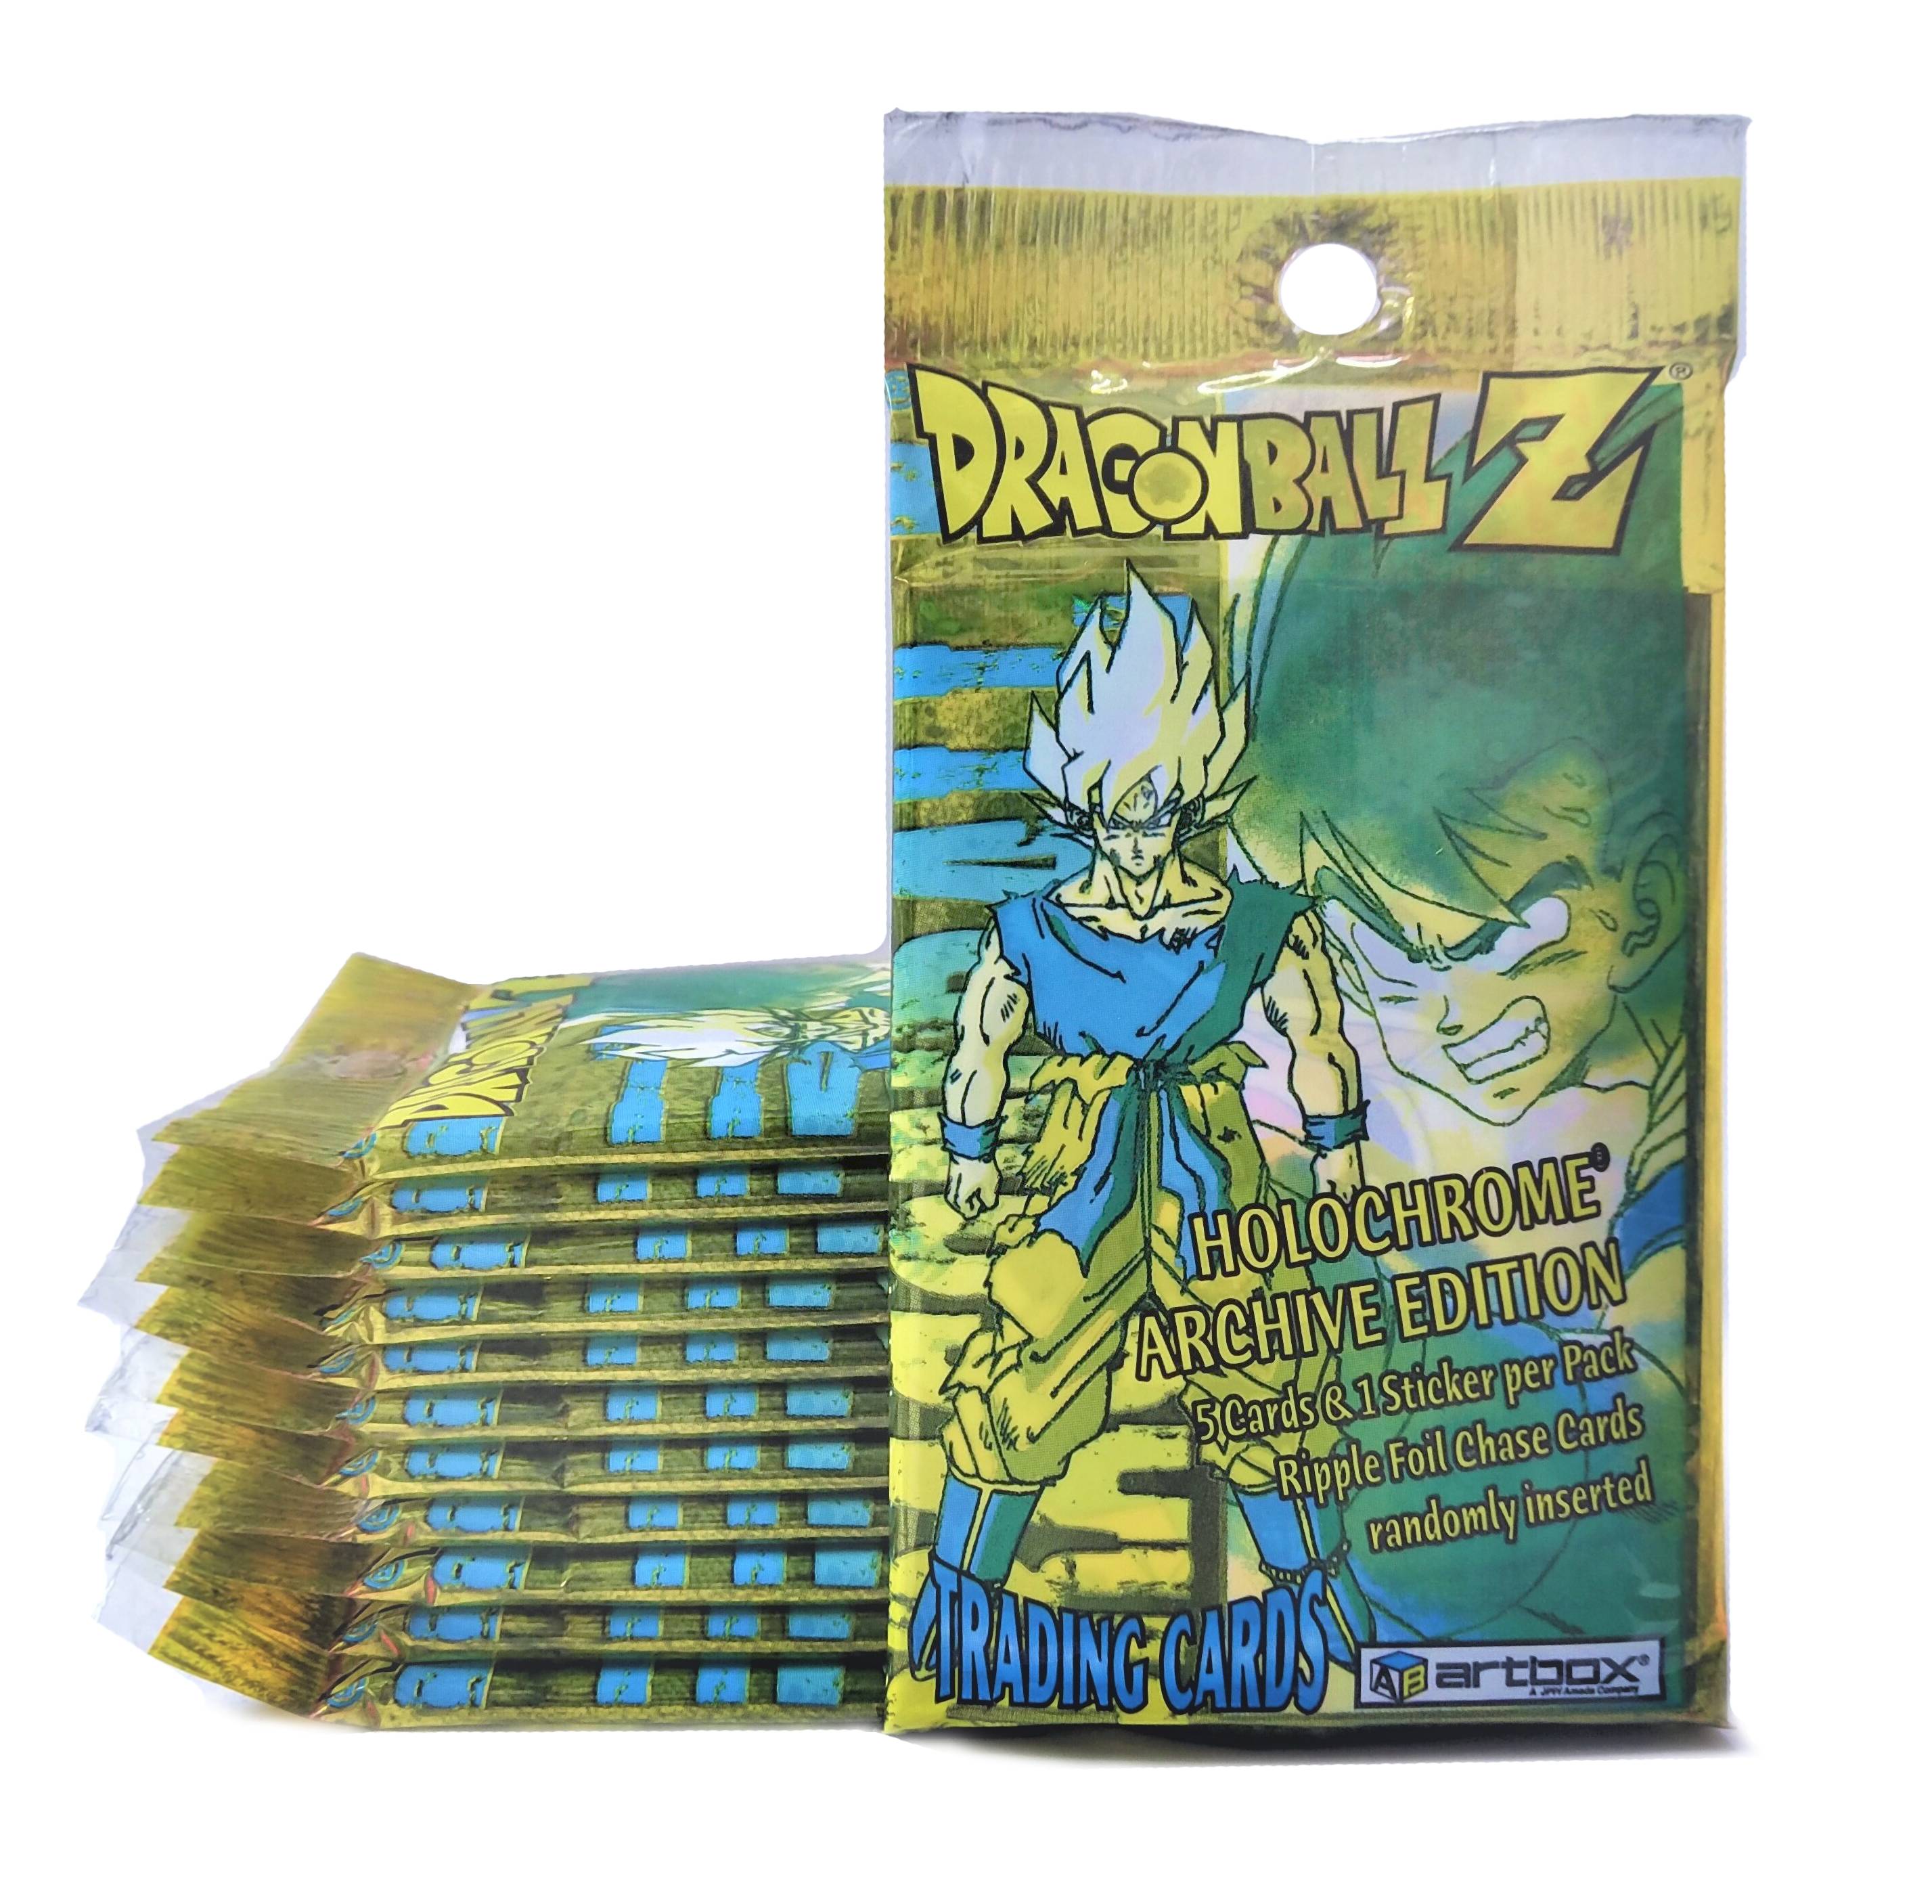 2000 Dragon Ball Z Holochrome Archive Edition Pack (Lot of 11 Packs) - Miraj Trading